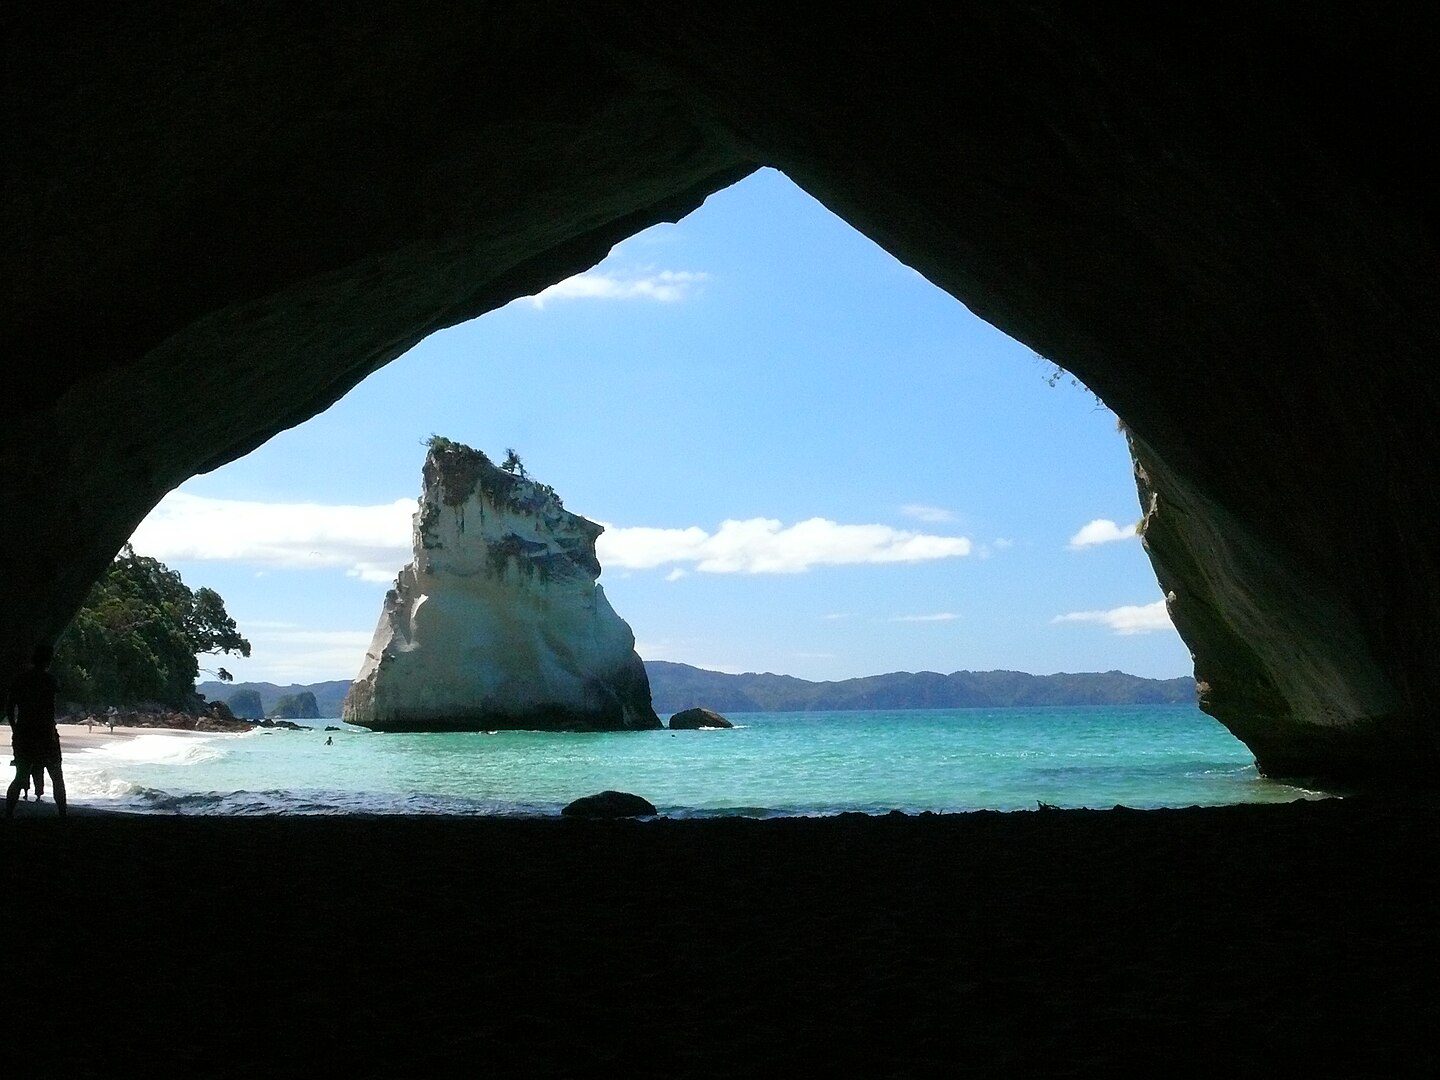 Cathedral Cove, New Zealand | credit: Superjul, CC BY-SA 3.0 via Wikimedia Commons